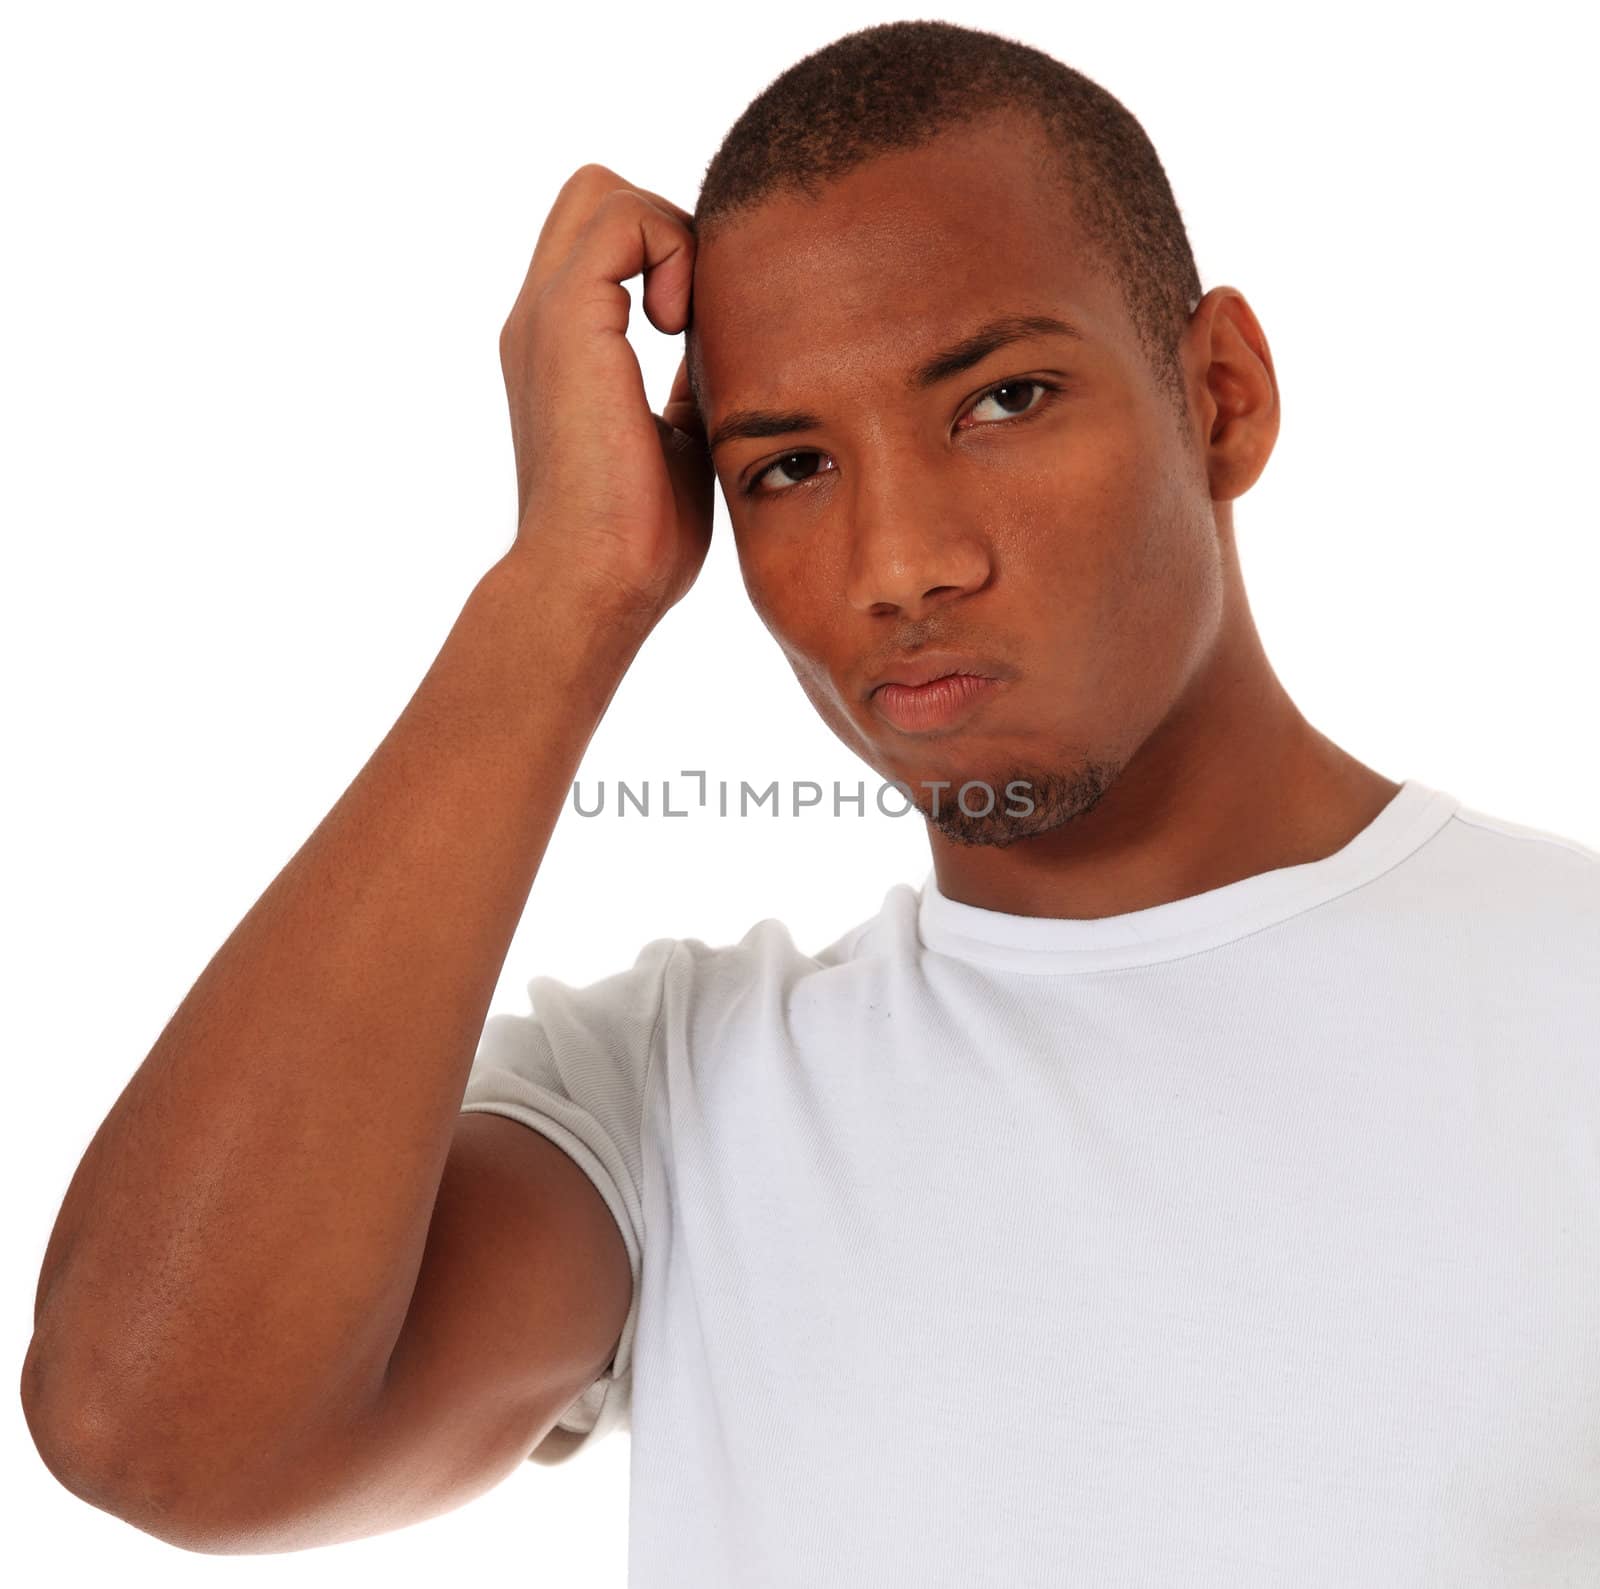 Clueless black man. All on white background.